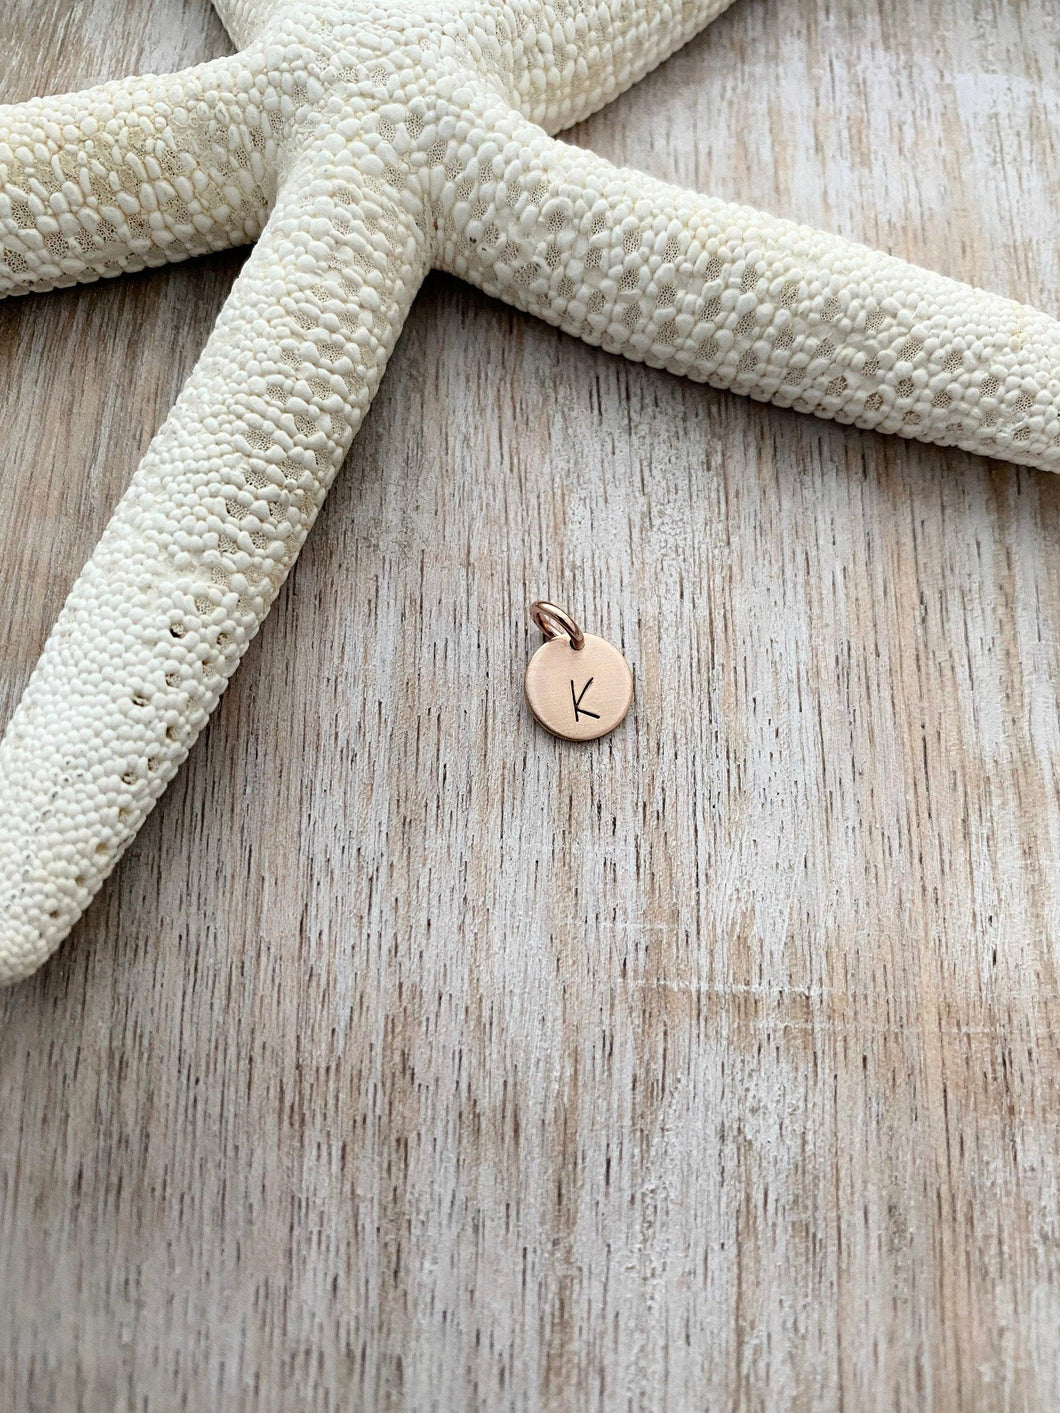 Add a tiny 14k Rose Gold Filled Initial Charm to Any Charm Necklace in My Shop